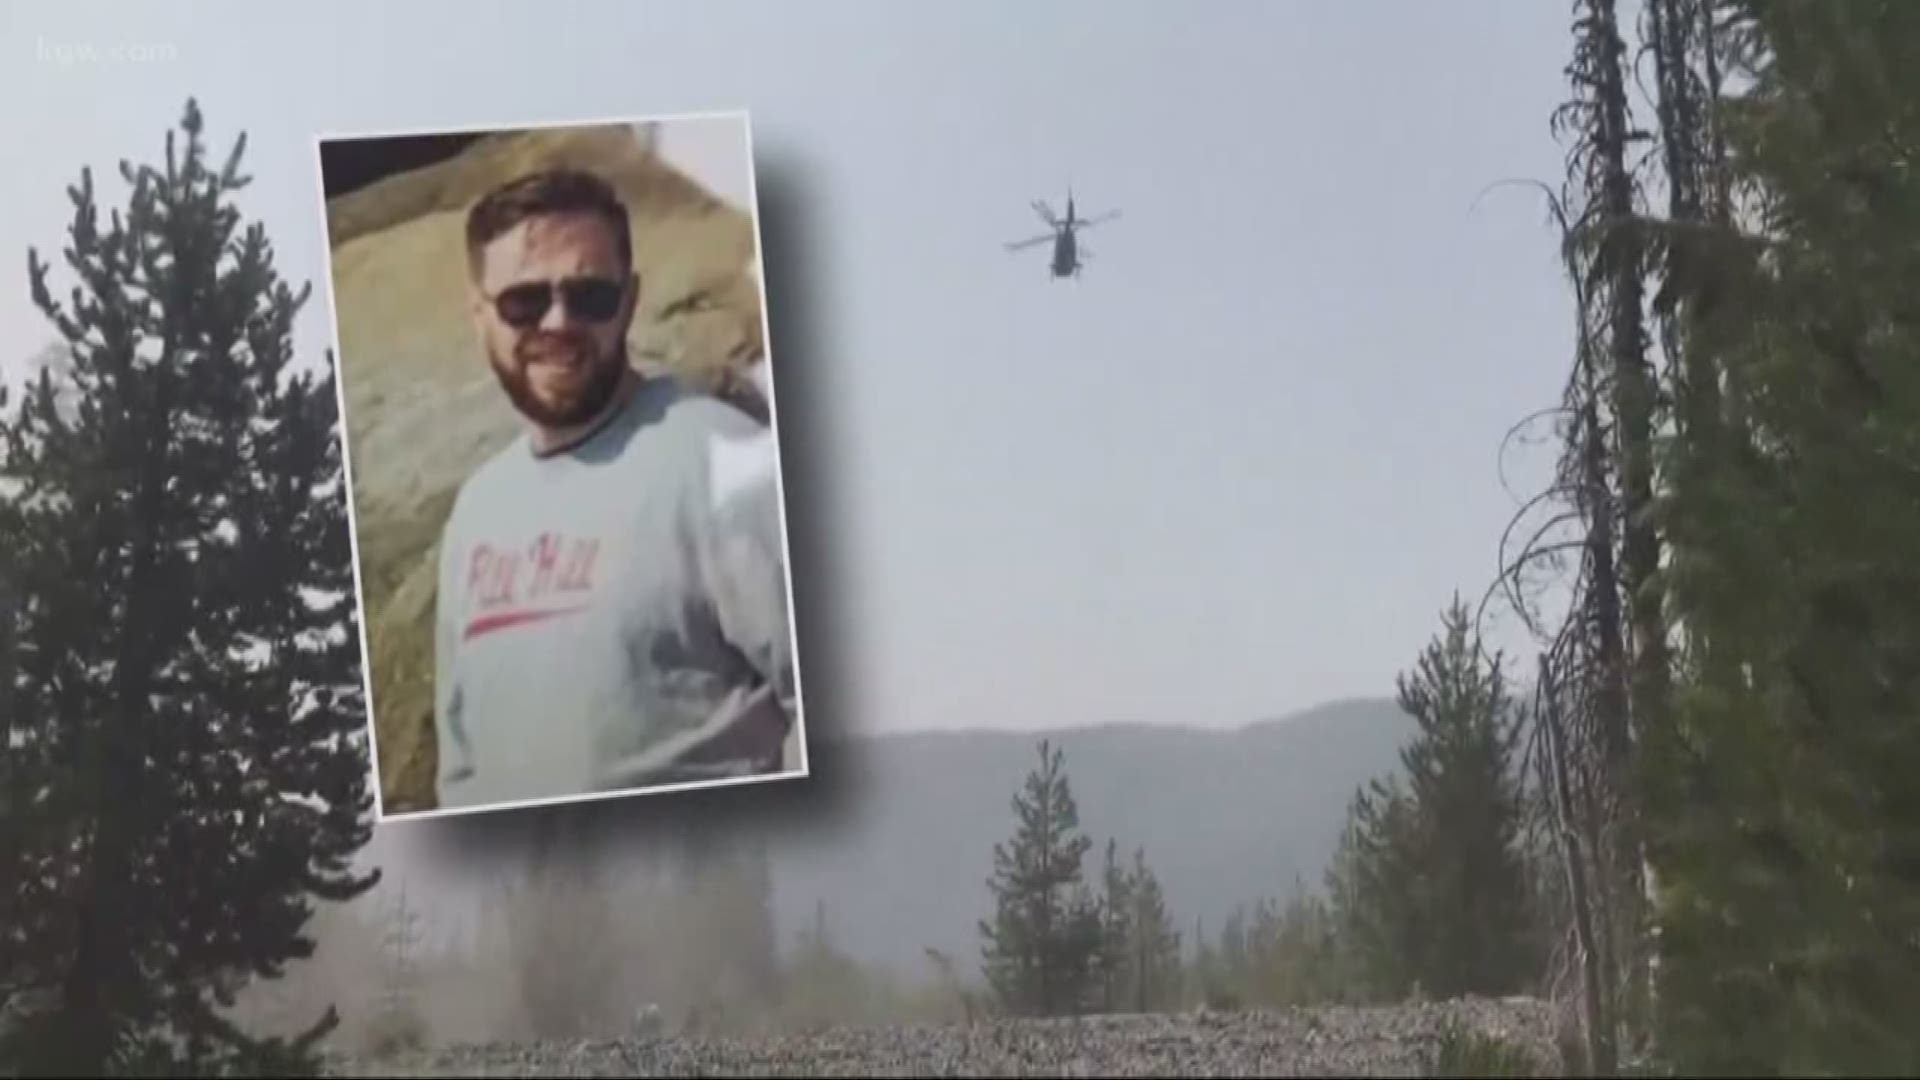 Survival experts break down the rescue at Mount St. Helens.